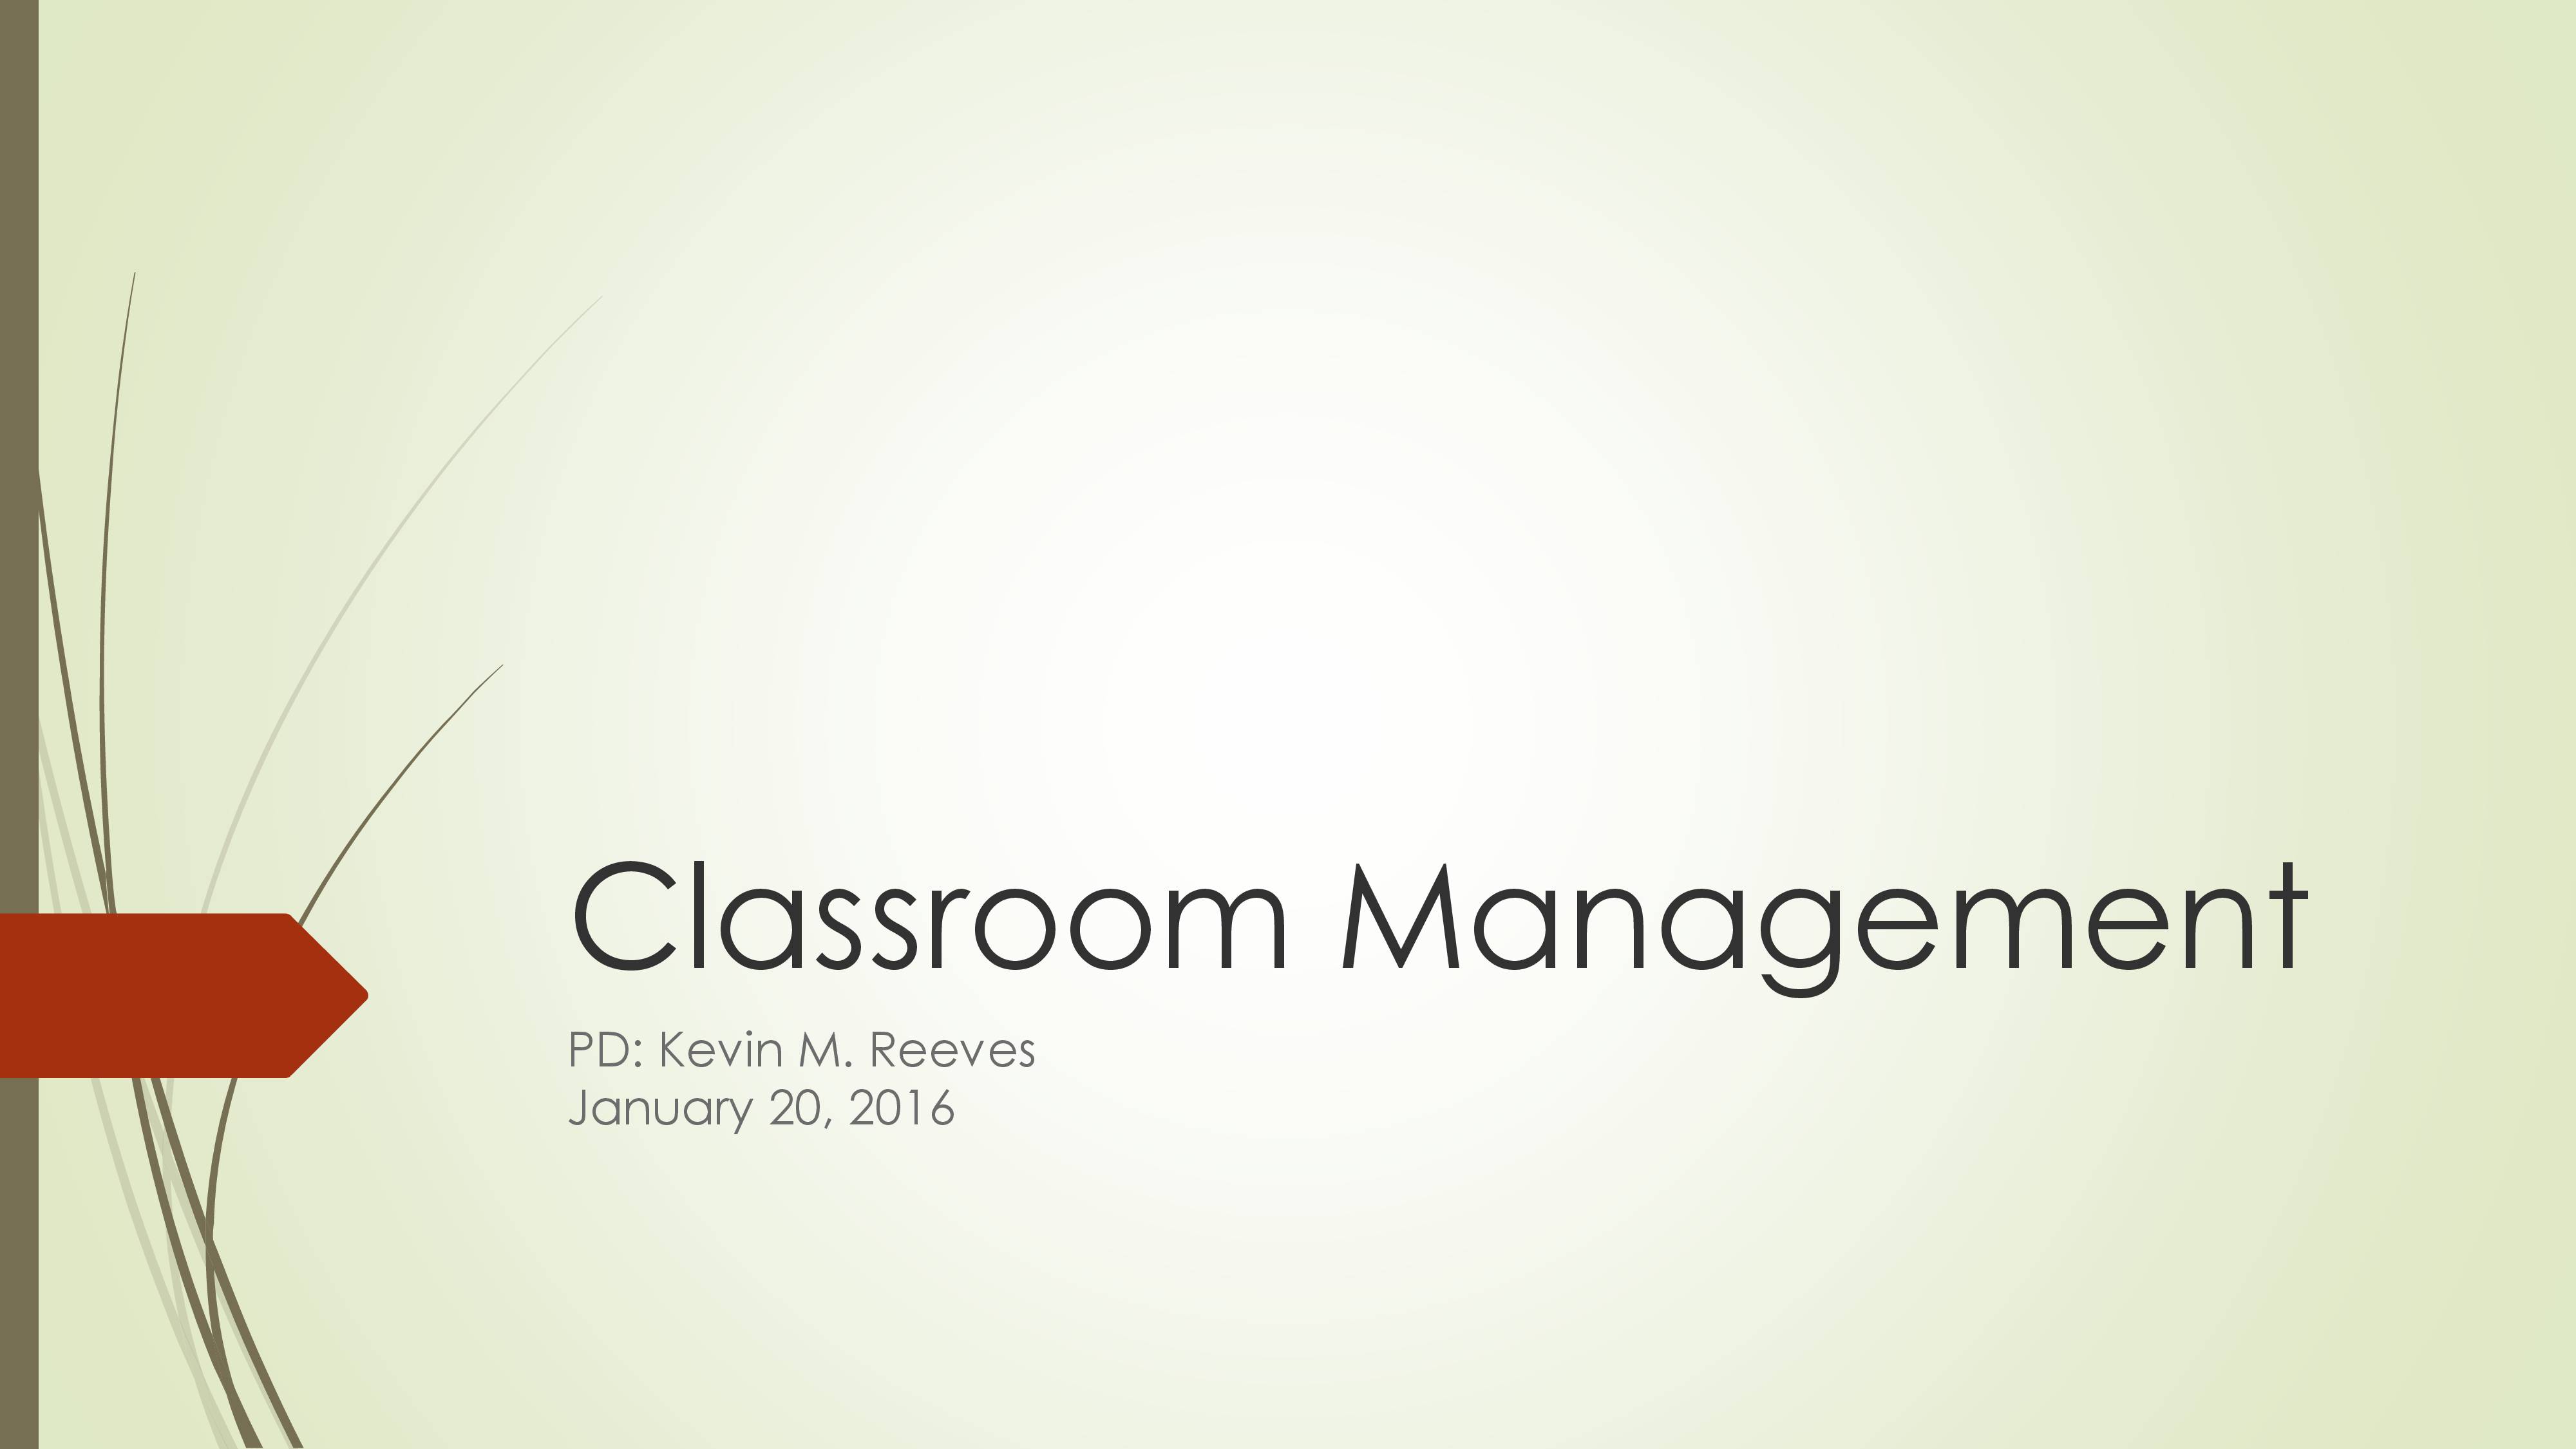 PPT on Classroom Management